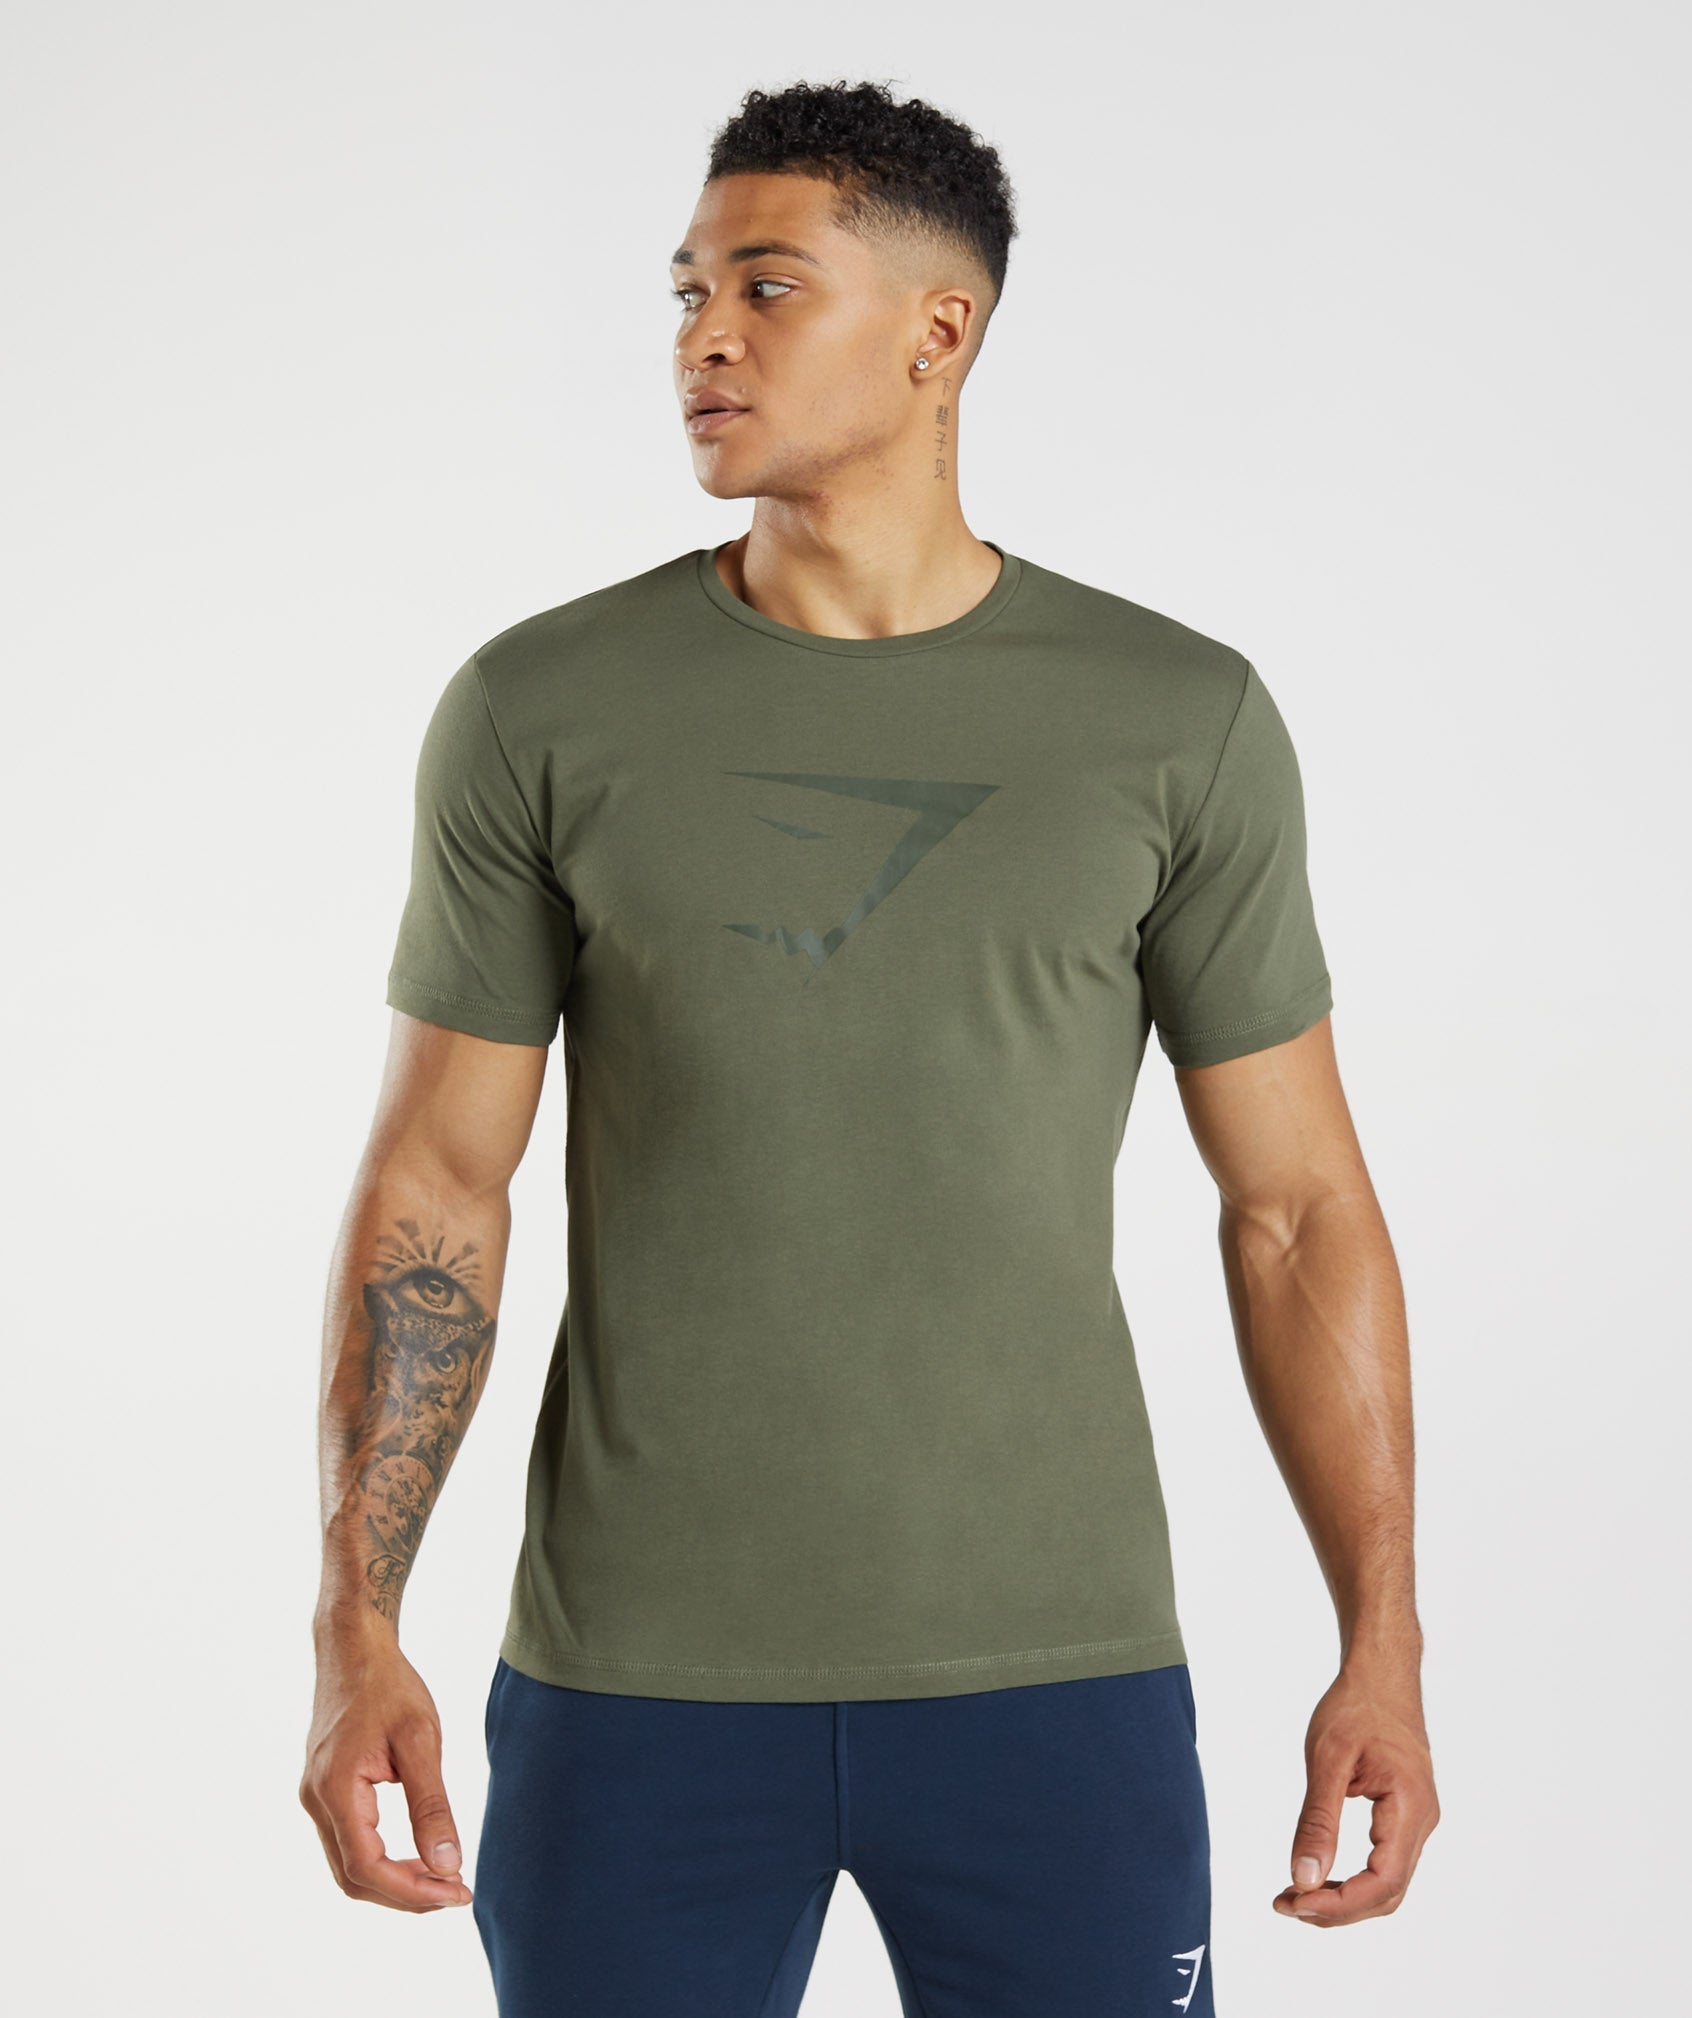 Sharkhead Infill T-Shirt in Core Olive